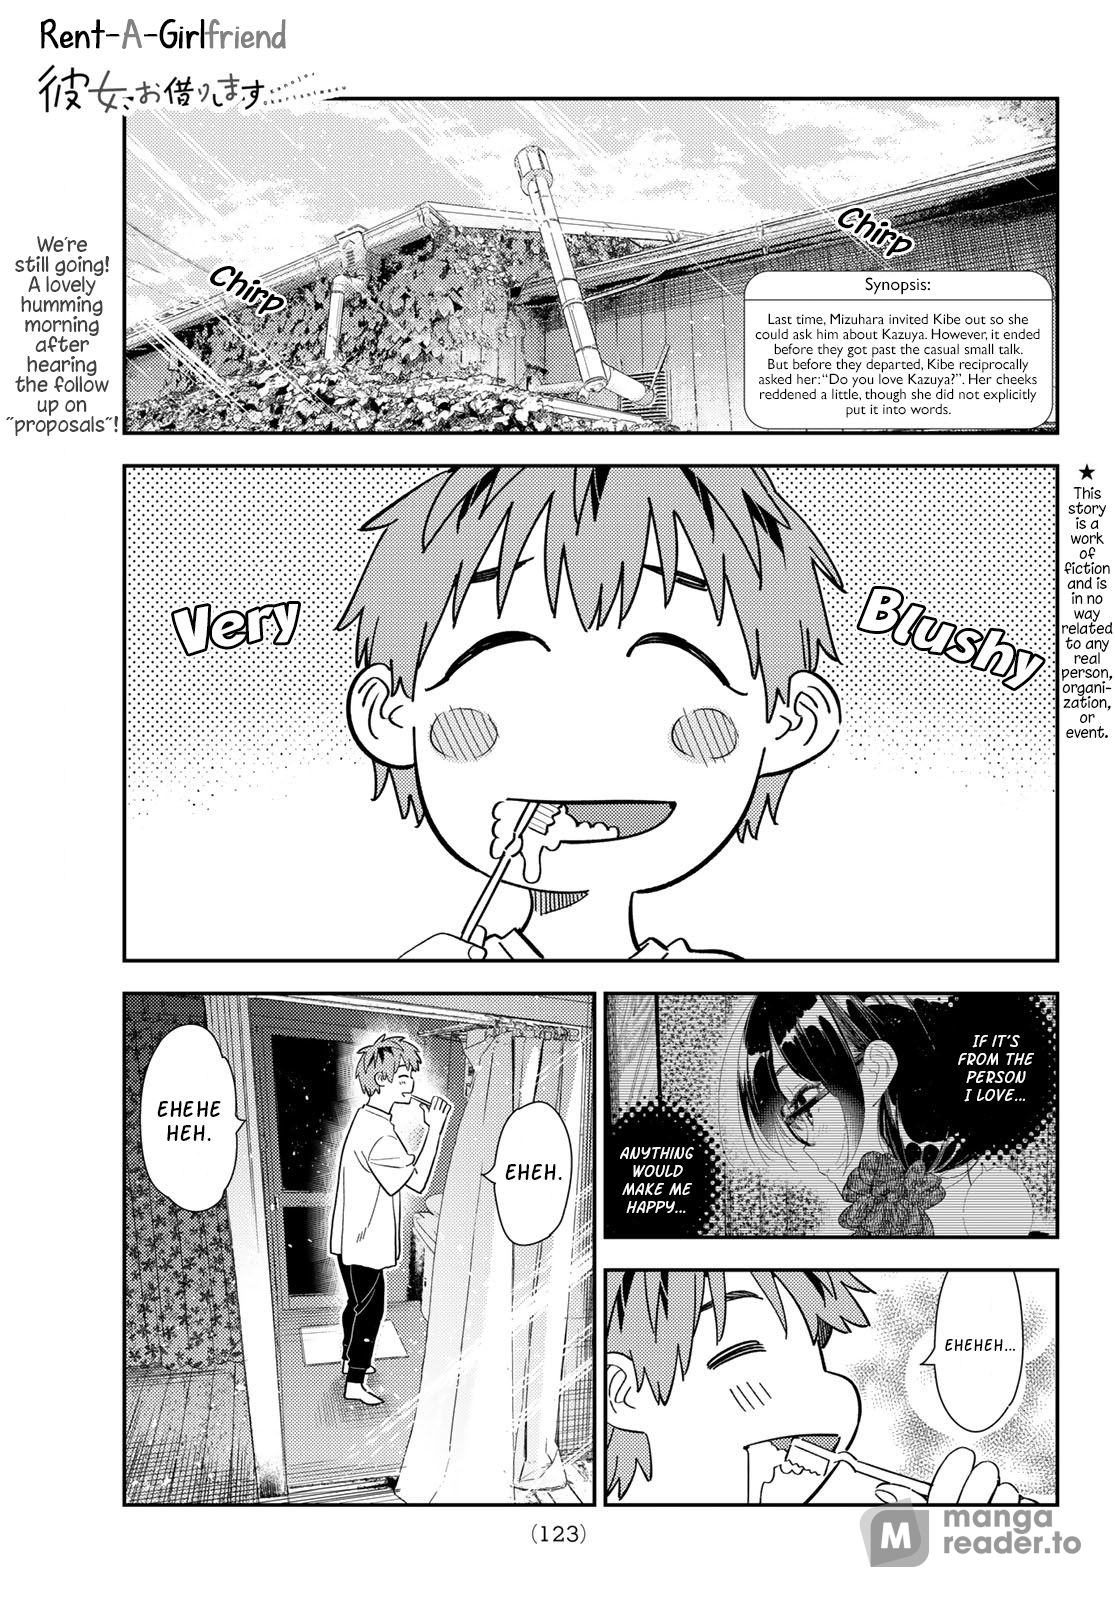 Rent-A-Girlfriend, Chapter 304 image 01